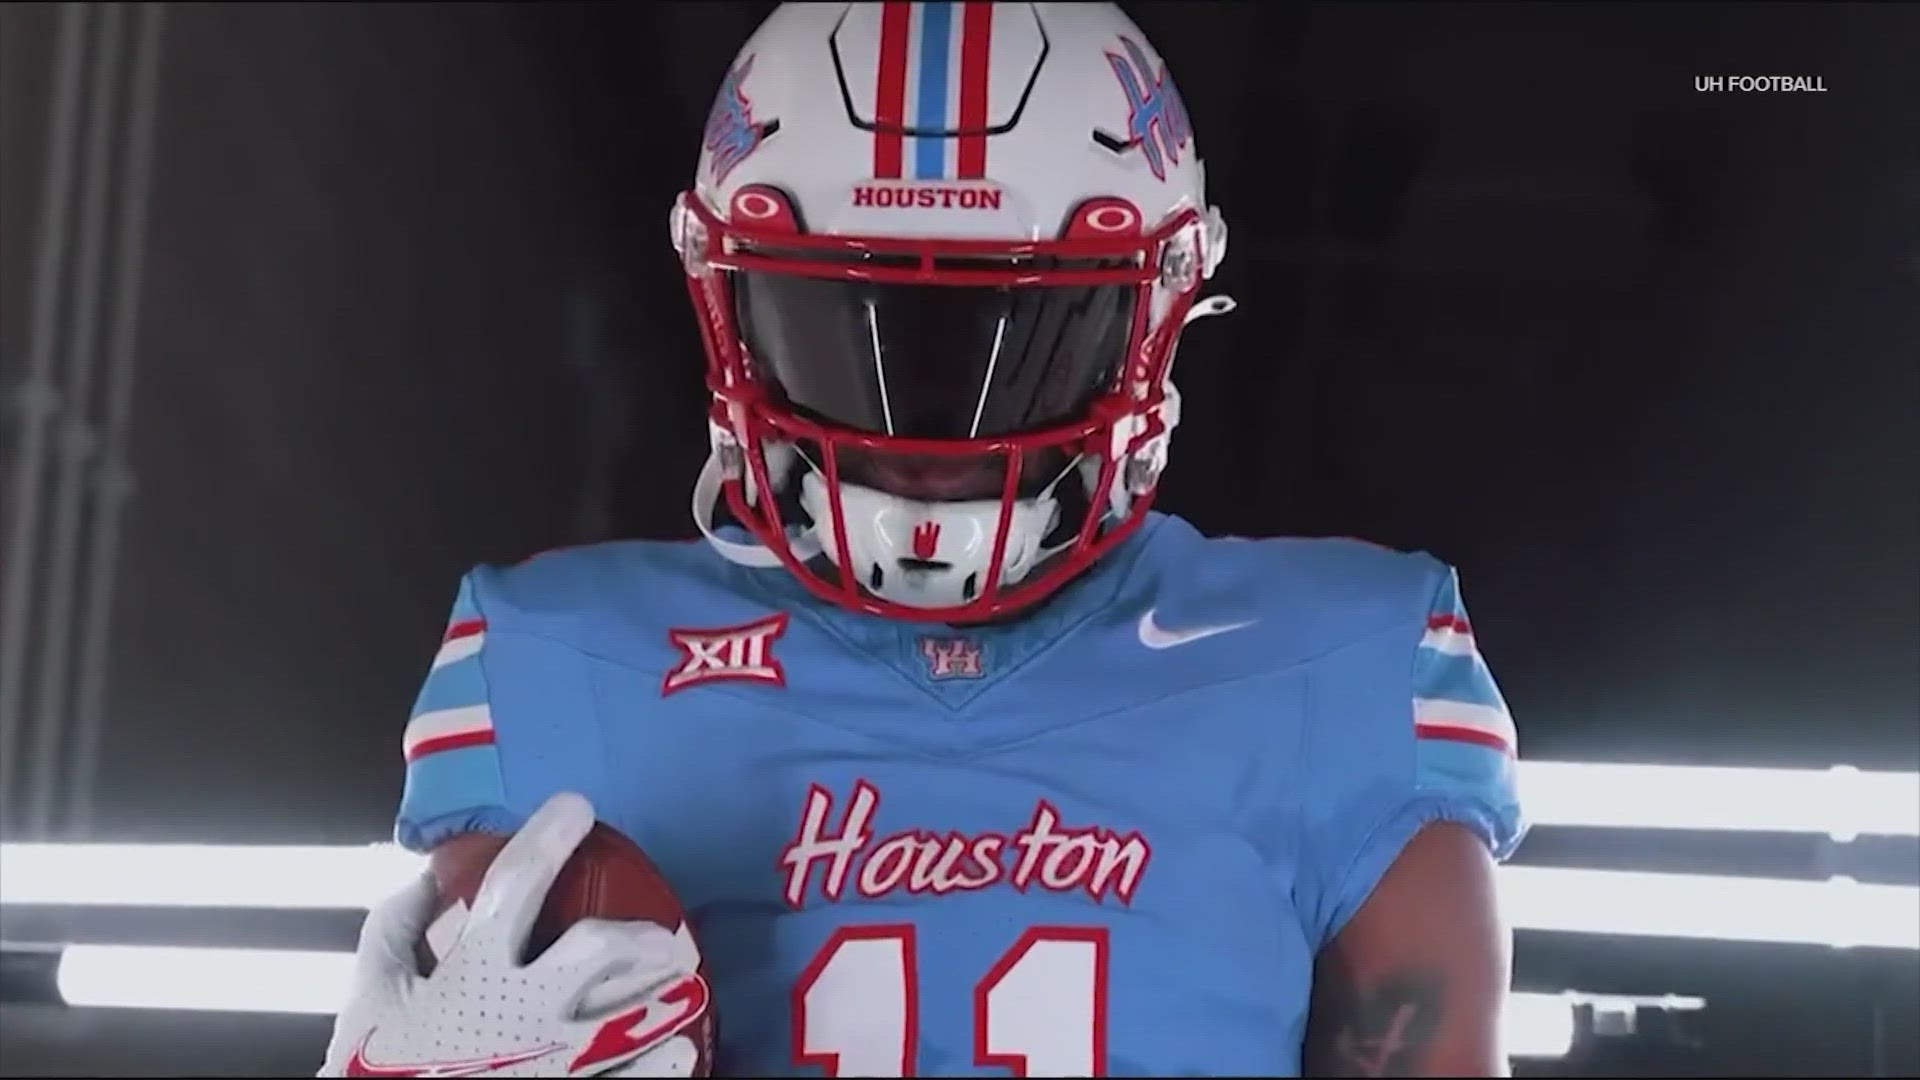 The jerseys were worn by the Houston Cougars for their home opener against UTSA earlier this season. According to the Chronicle, the NFL said that's a violation.